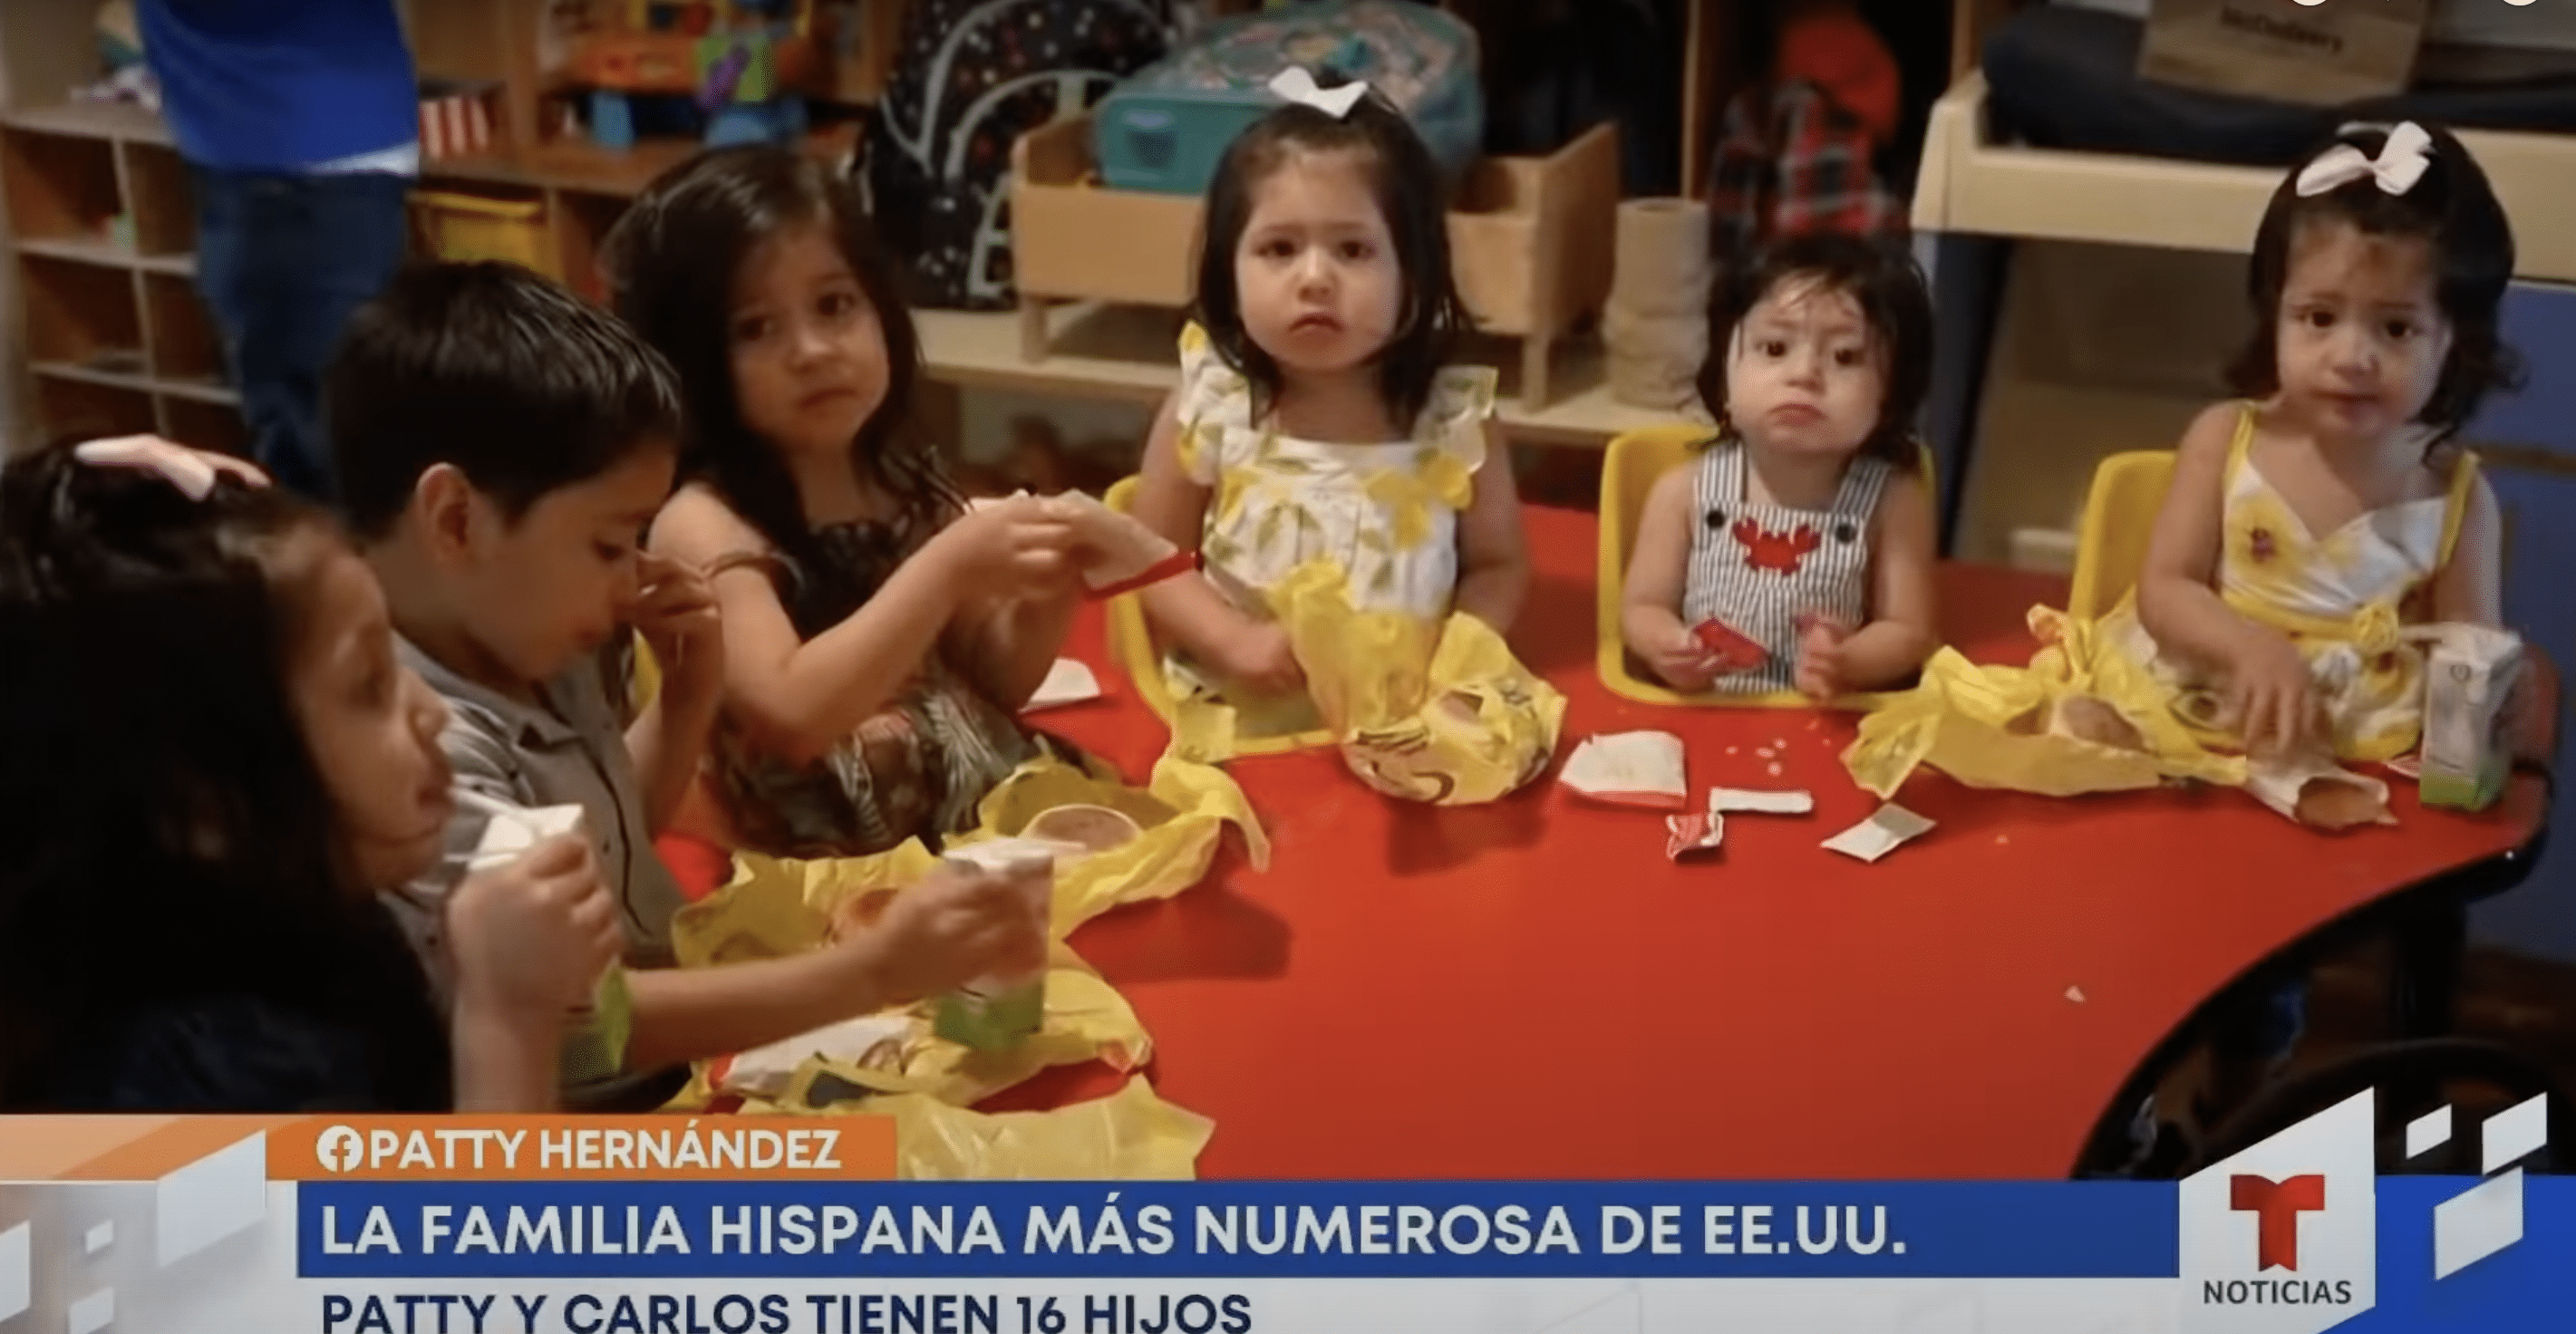 A few of the Hernandez kids are seen having food. | Source: YouTube.com/hoy Día